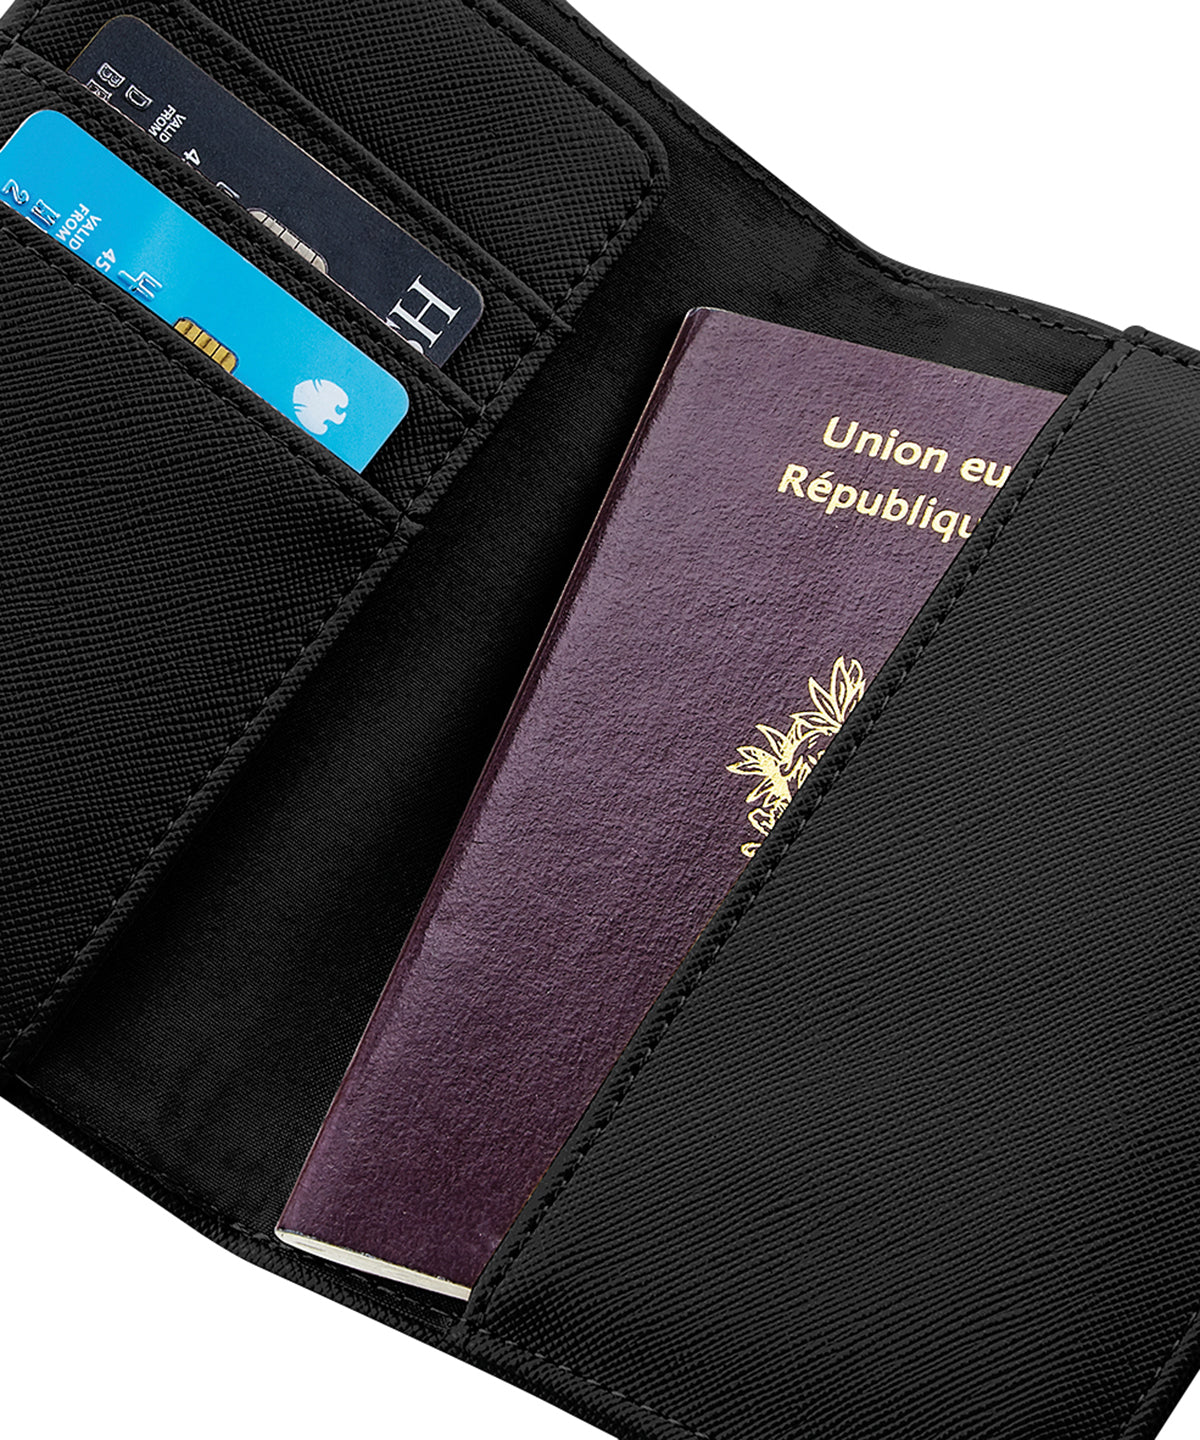 Passport Cover and Luggage Tag Set – etchthisout